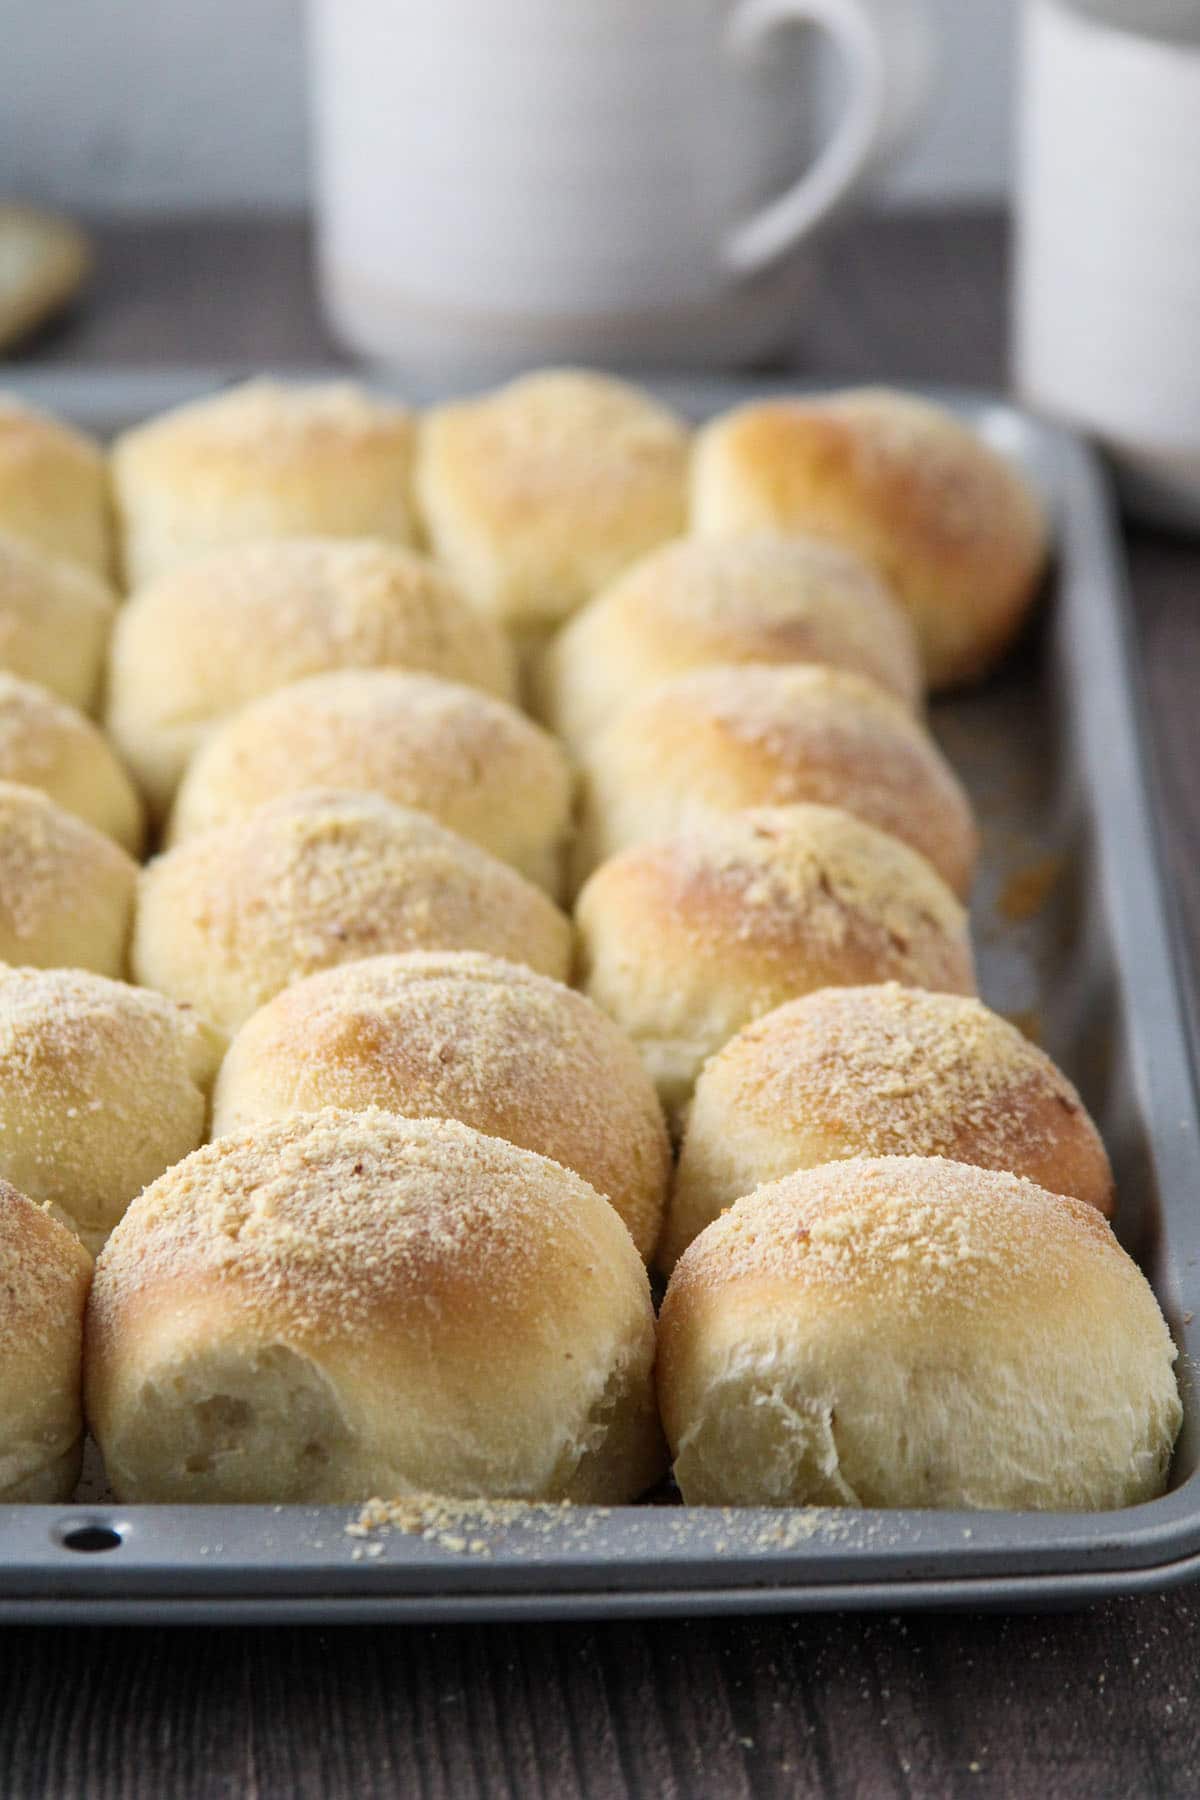 Freshy baked pandesal on a baking tray.